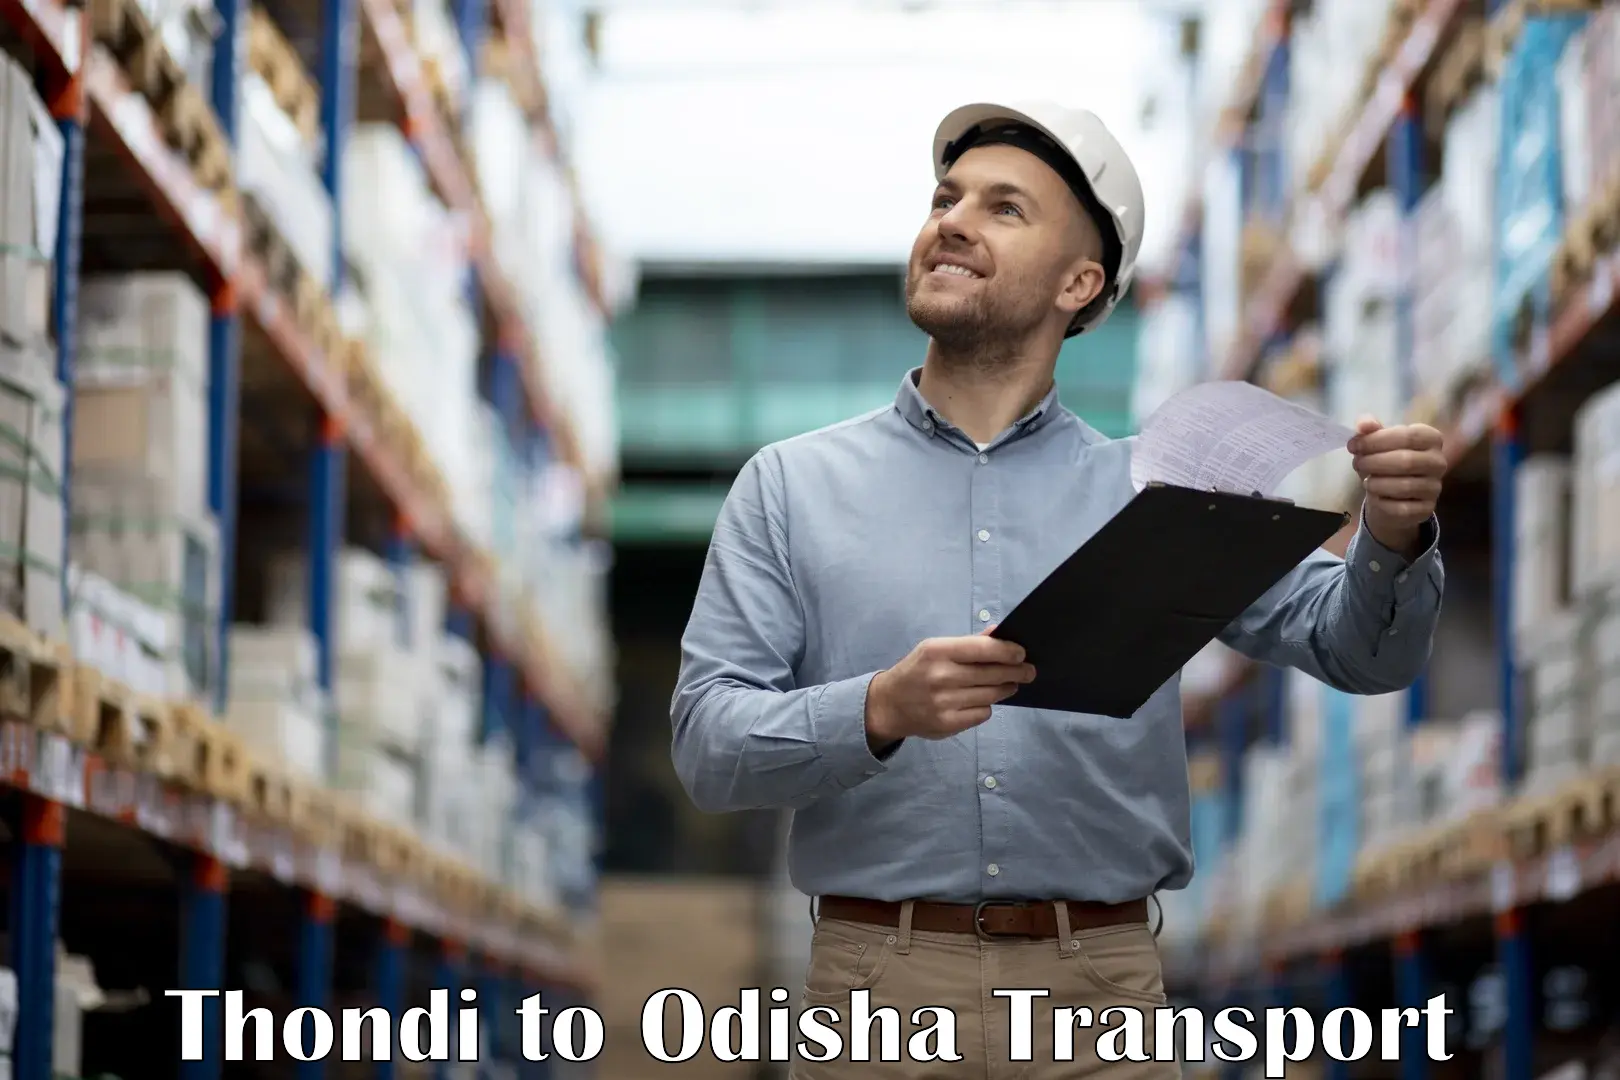 Delivery service Thondi to Bhubaneswar